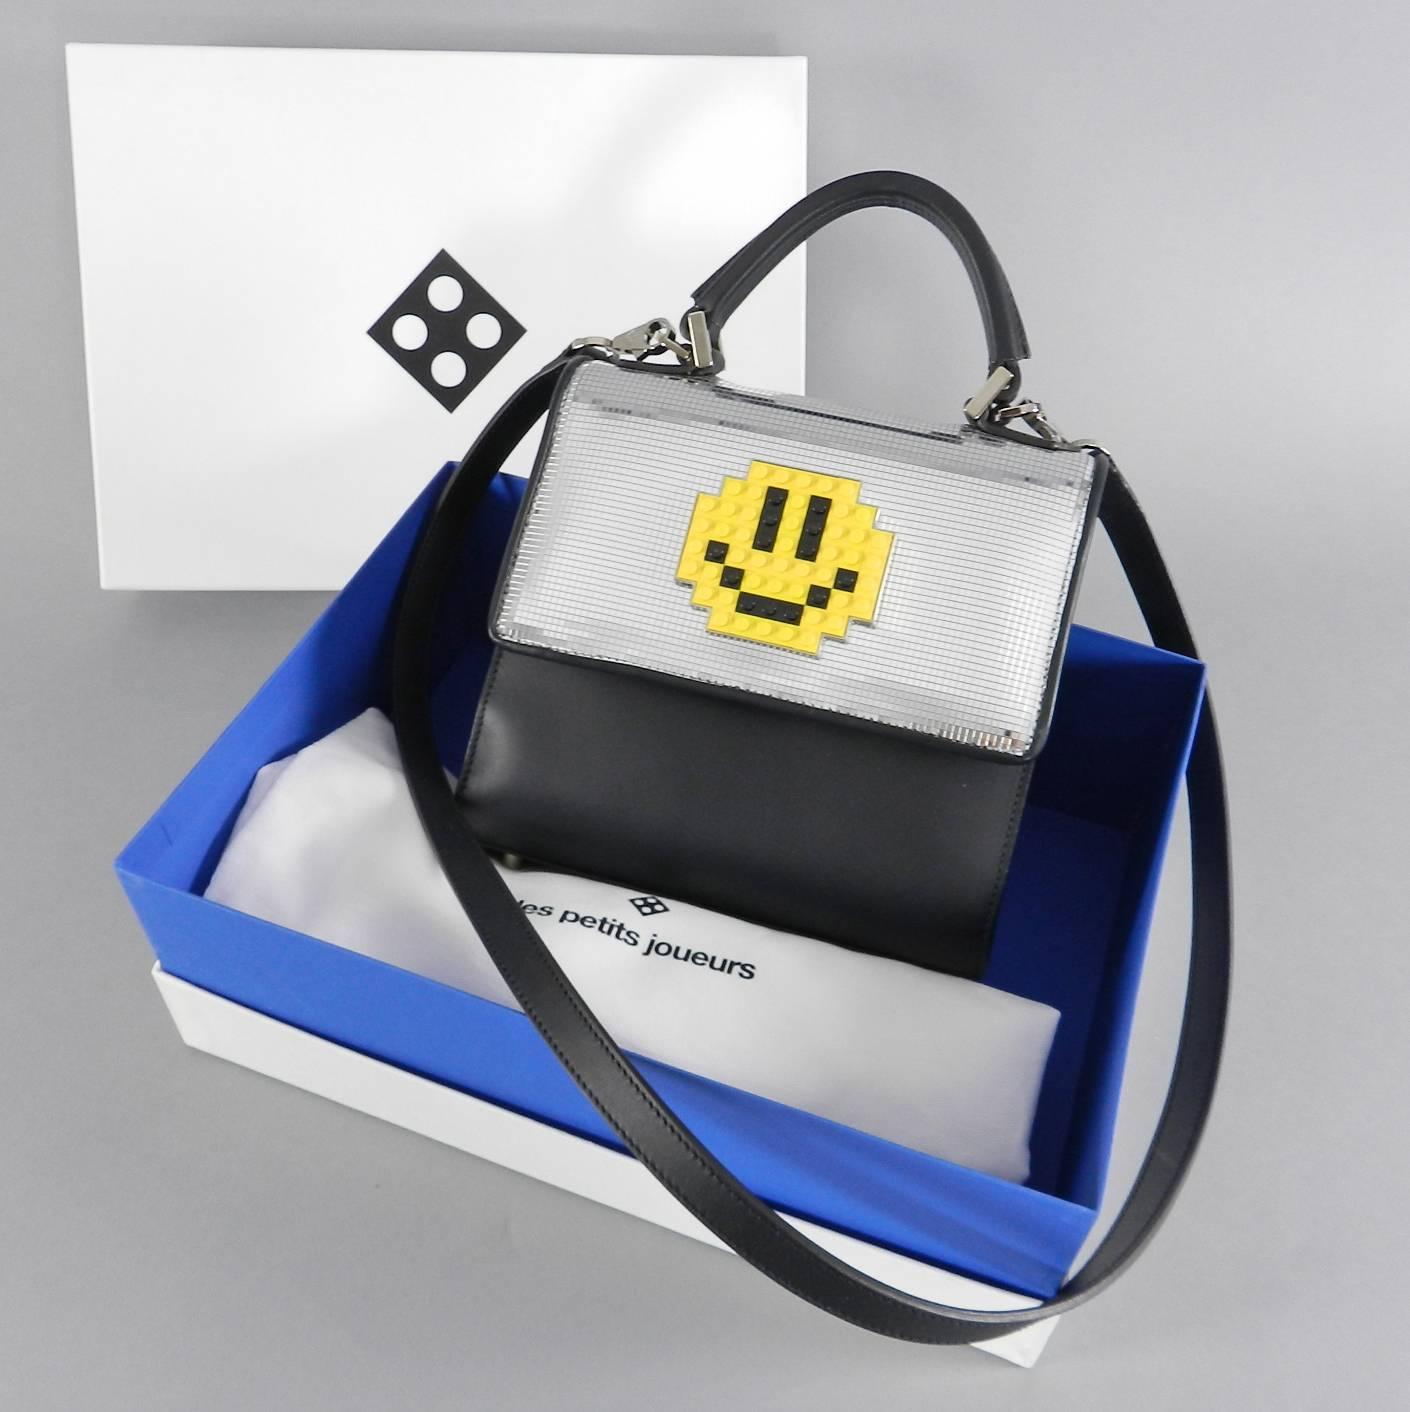 Les Petit Joueurs Mini Alex Smile Bag. Black leather body with silver metallic front and yellow real lego smiley face.  Like new - used once - excellent clean condition with original box and papers.  Body of bag measures 8 x 7.5 x 3.5